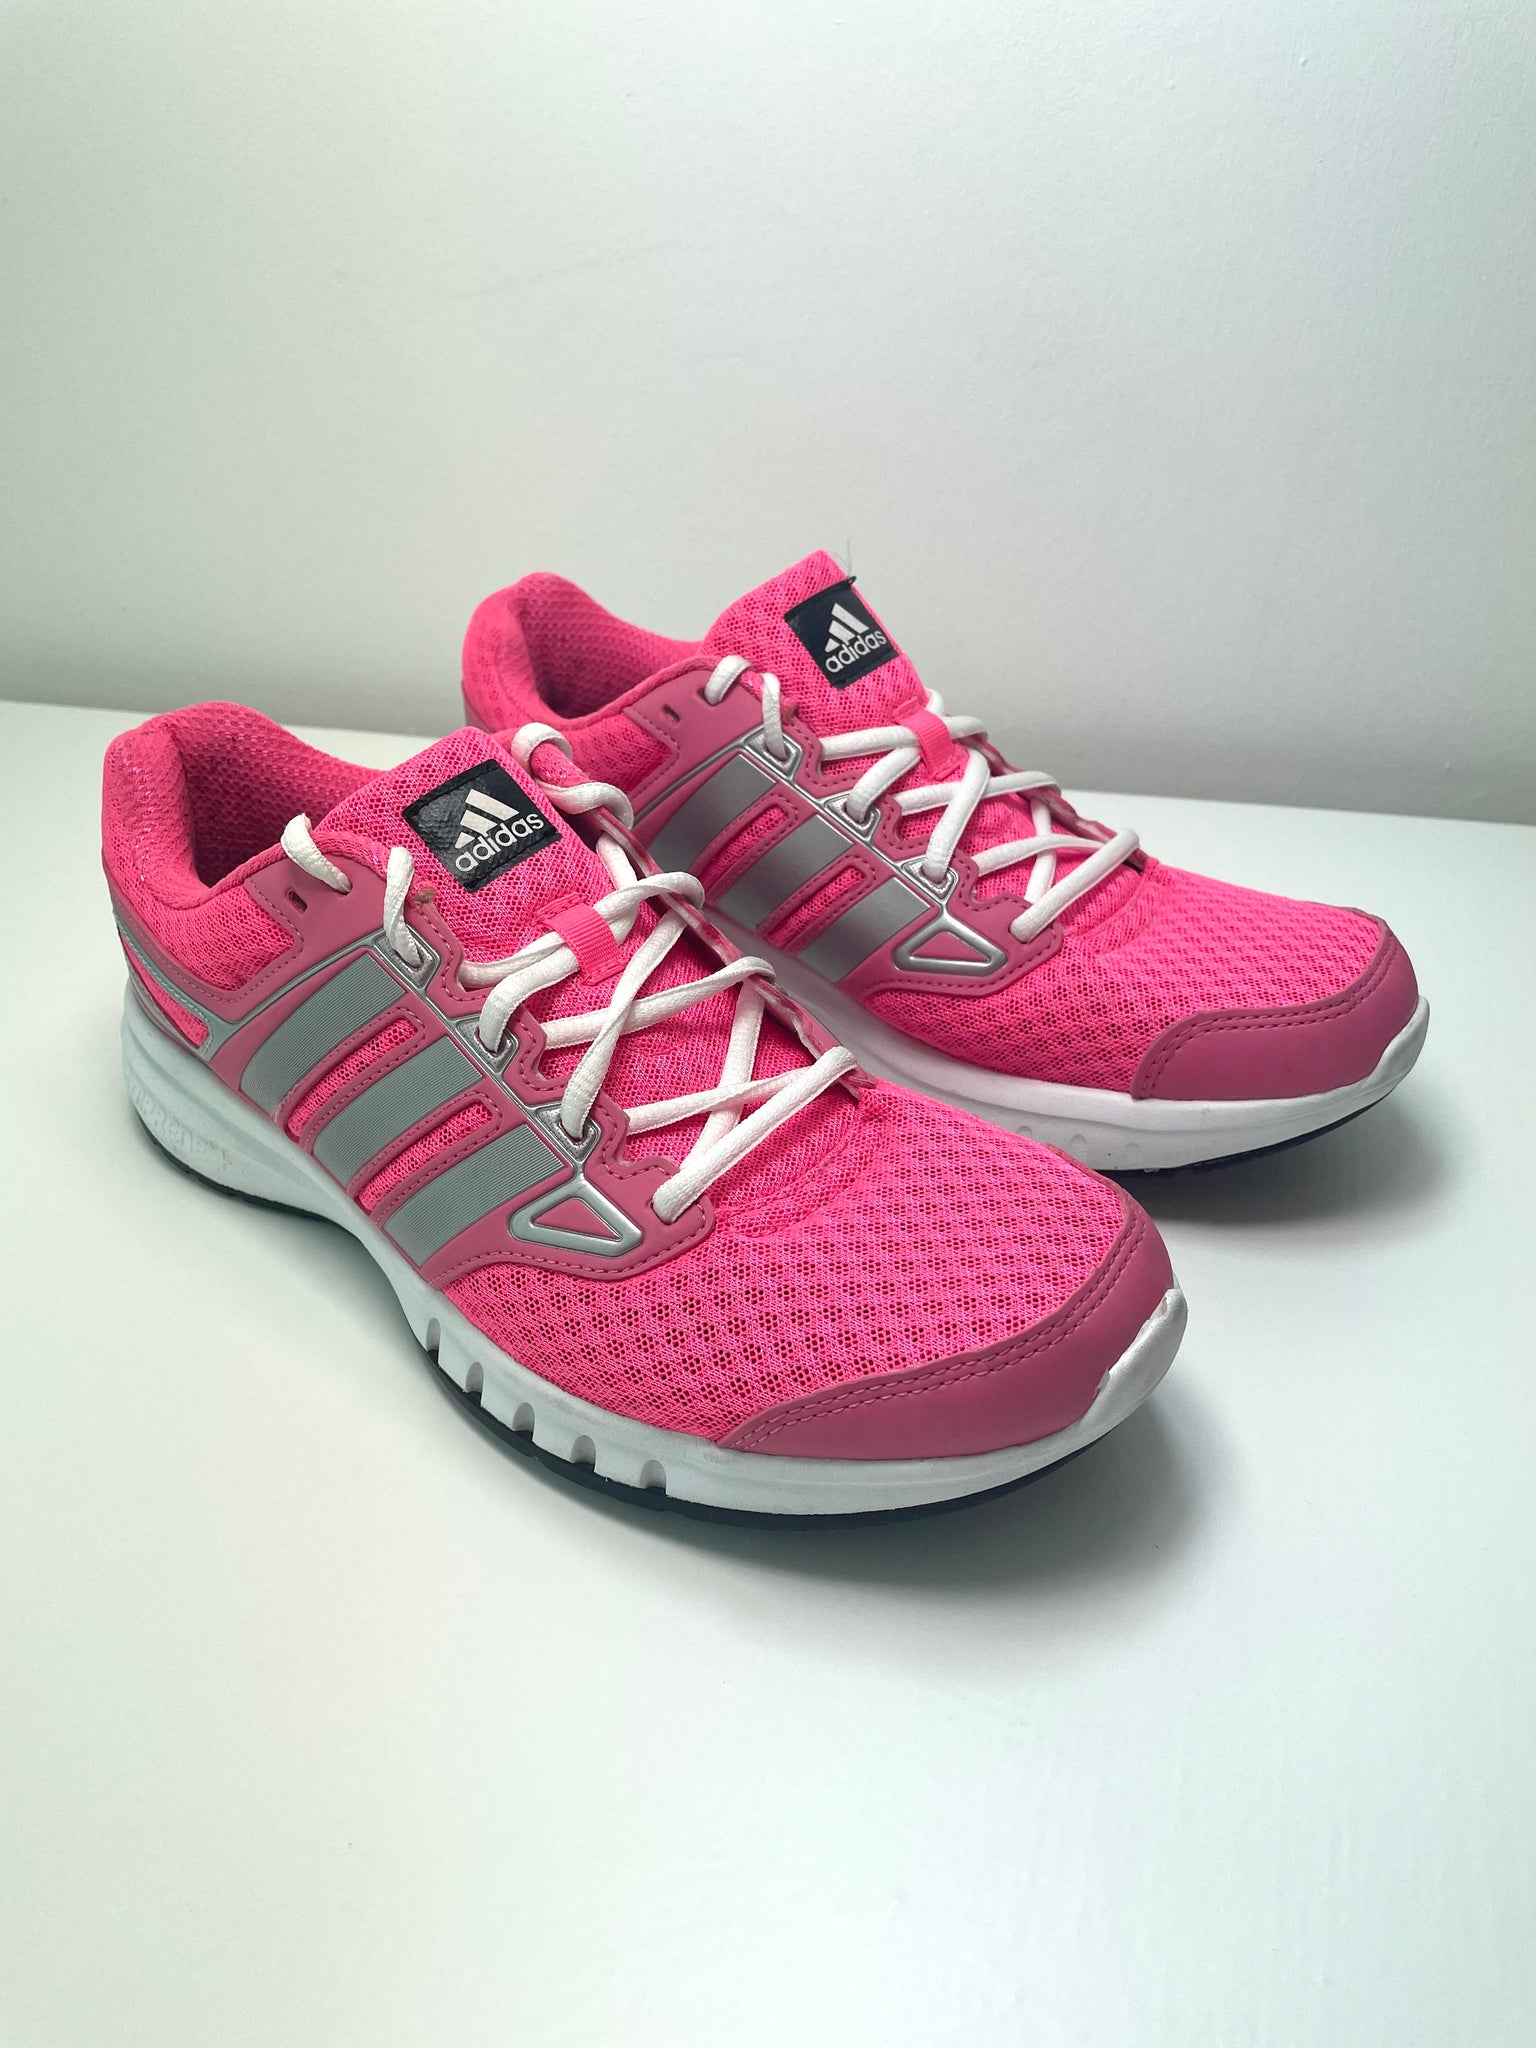 Adidas Adiprene Plus Trainers Running Shoes in Pink – Clearo Limited